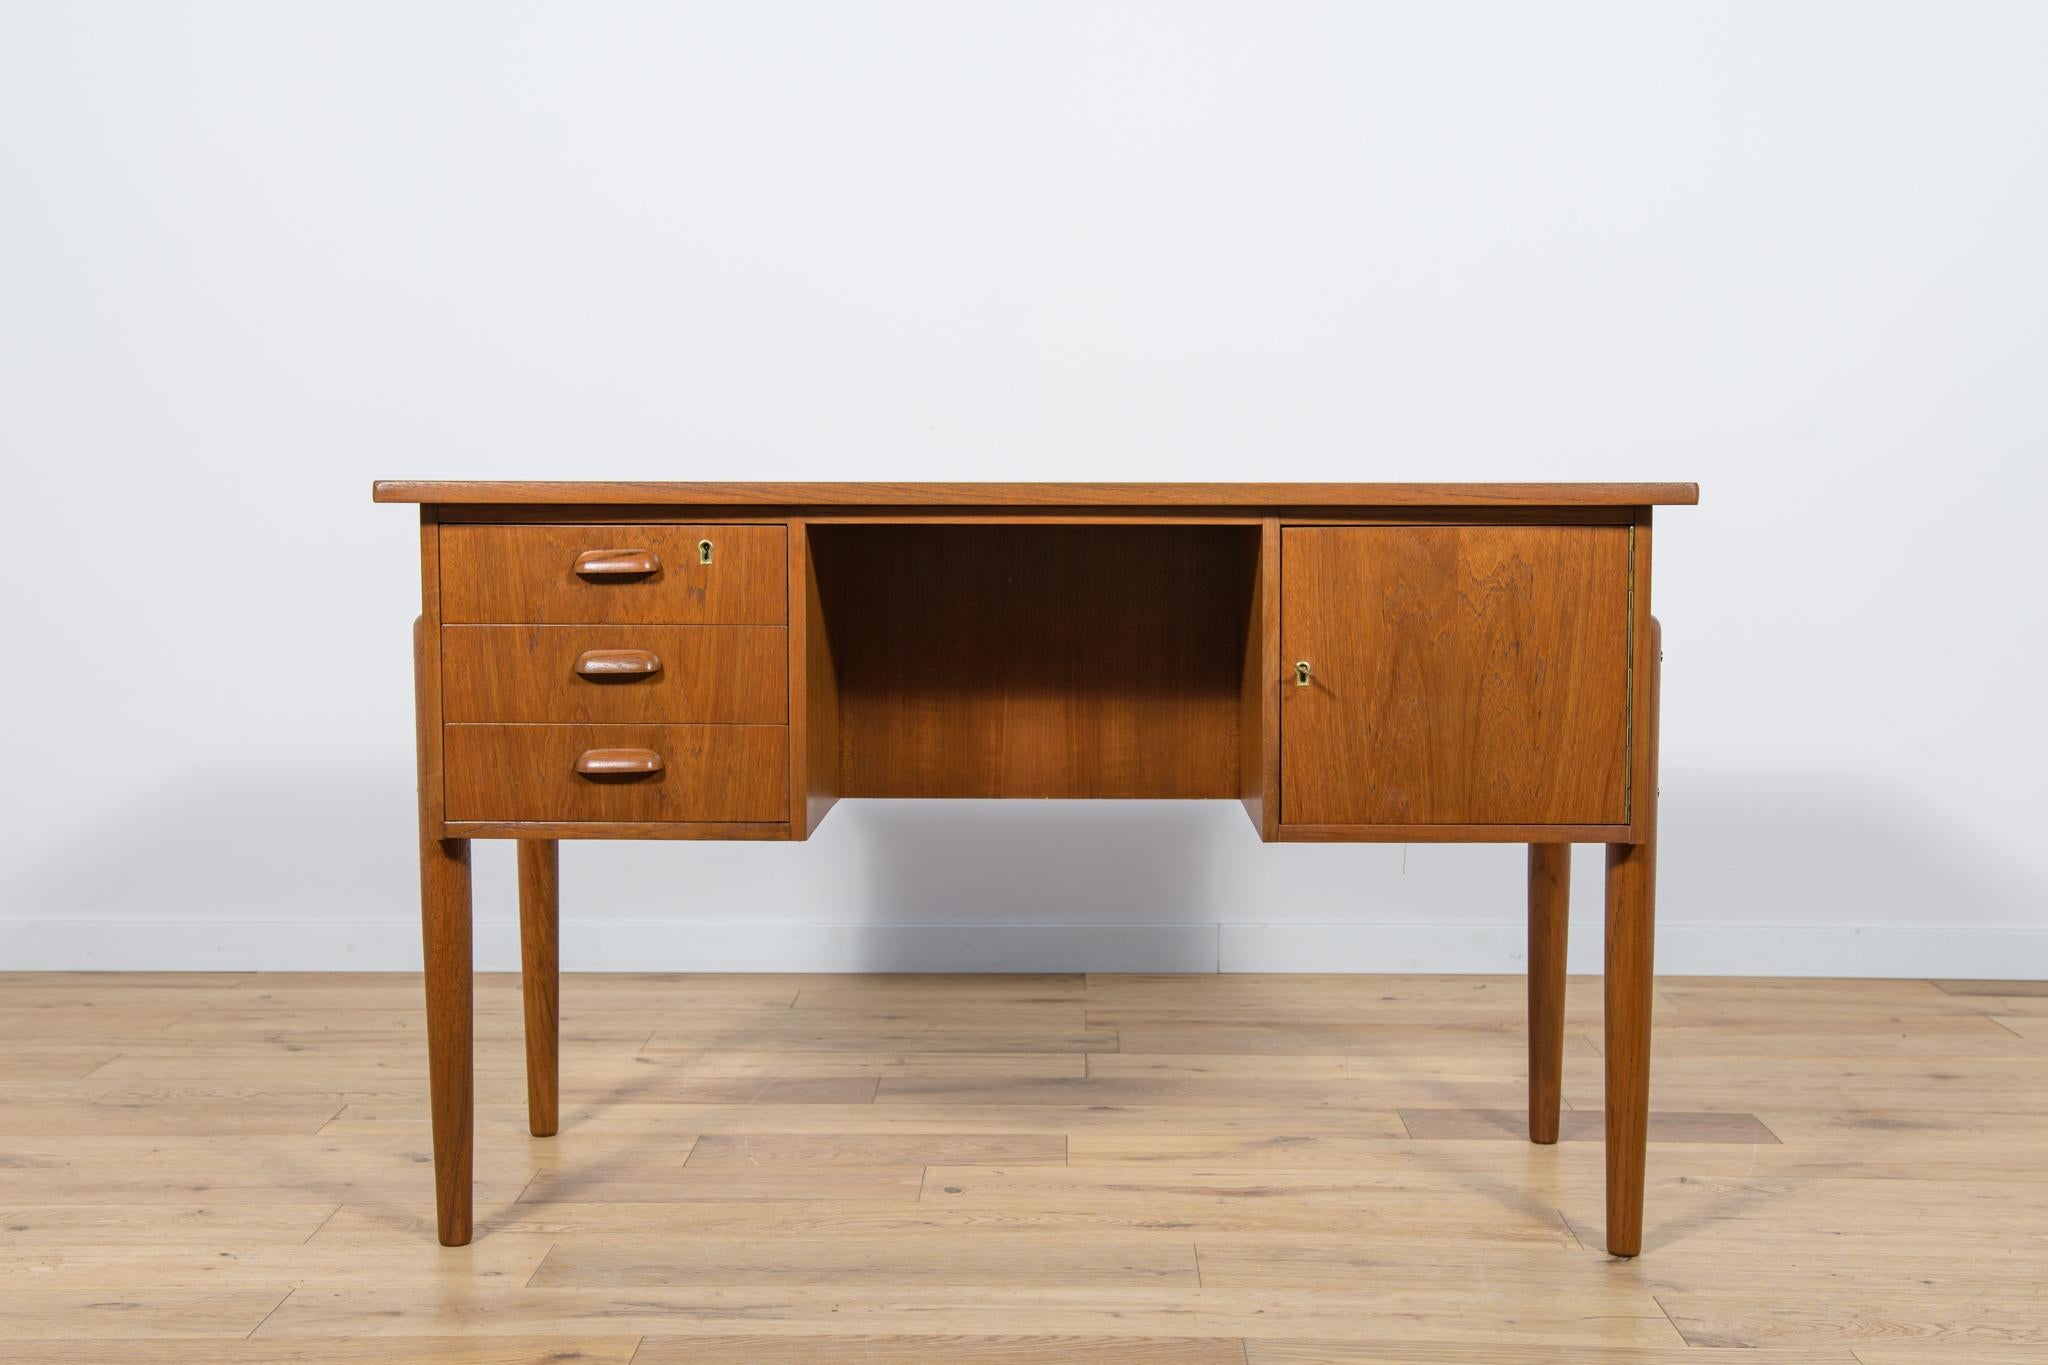 This desk was made in Denmark in the 1960s. It was made of teak wood with contoured handles. It consists of two modules, on the left there are three drawers, on the right there is a lockable cabinet. There is a bookshelf in the back. Completely